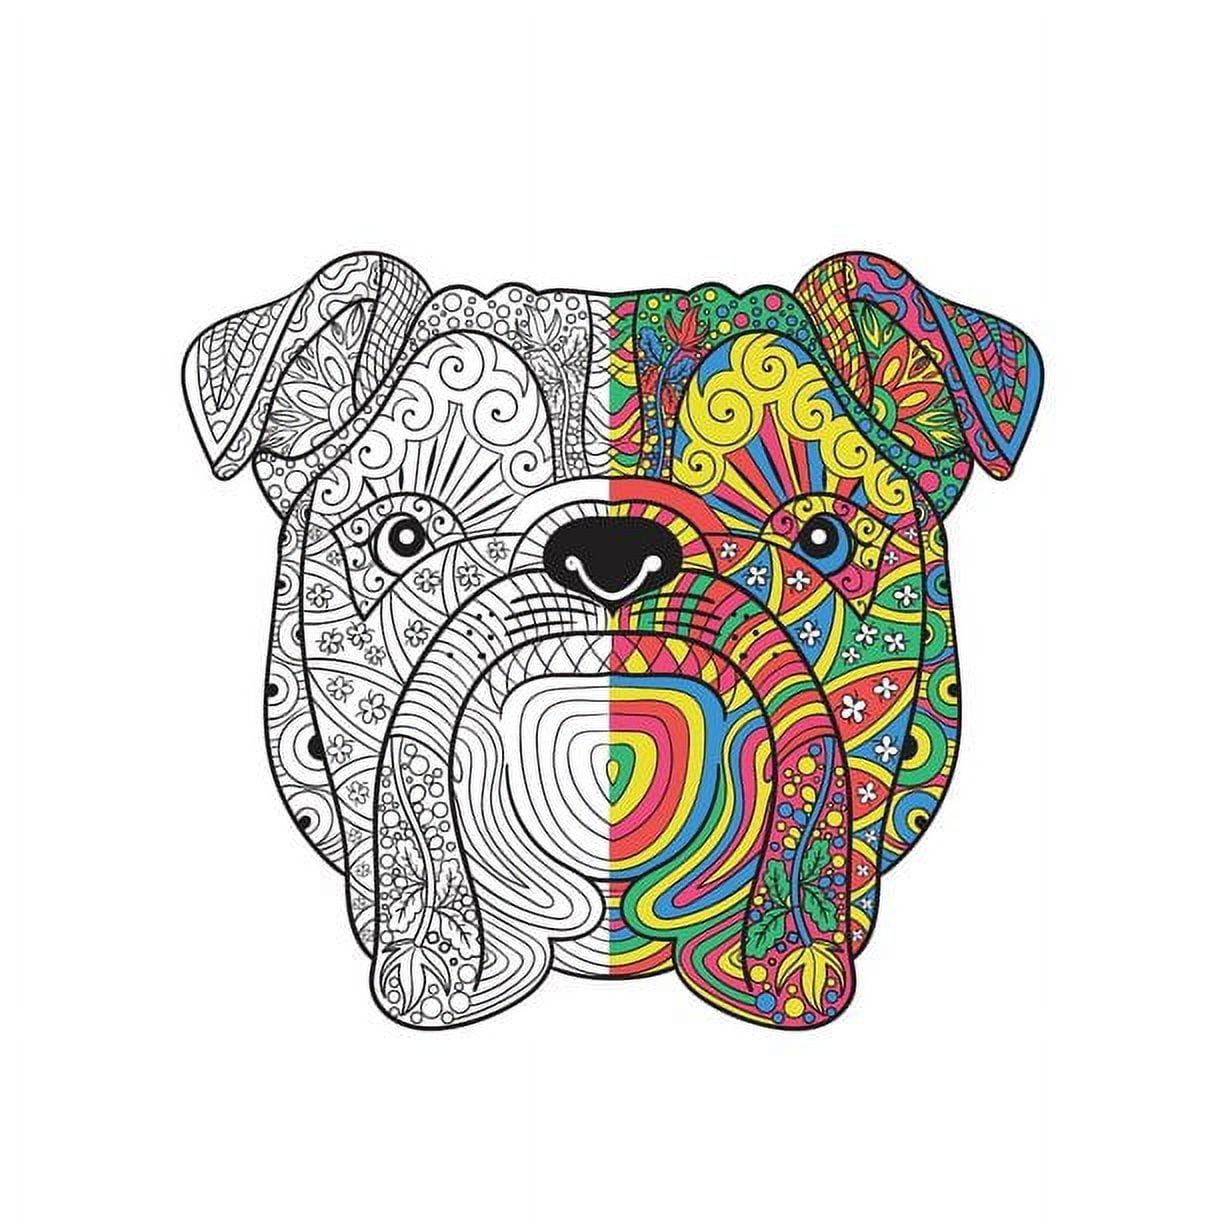 Buy Keep Calm Adult Coloring Books (Set of 3) at S&S Worldwide